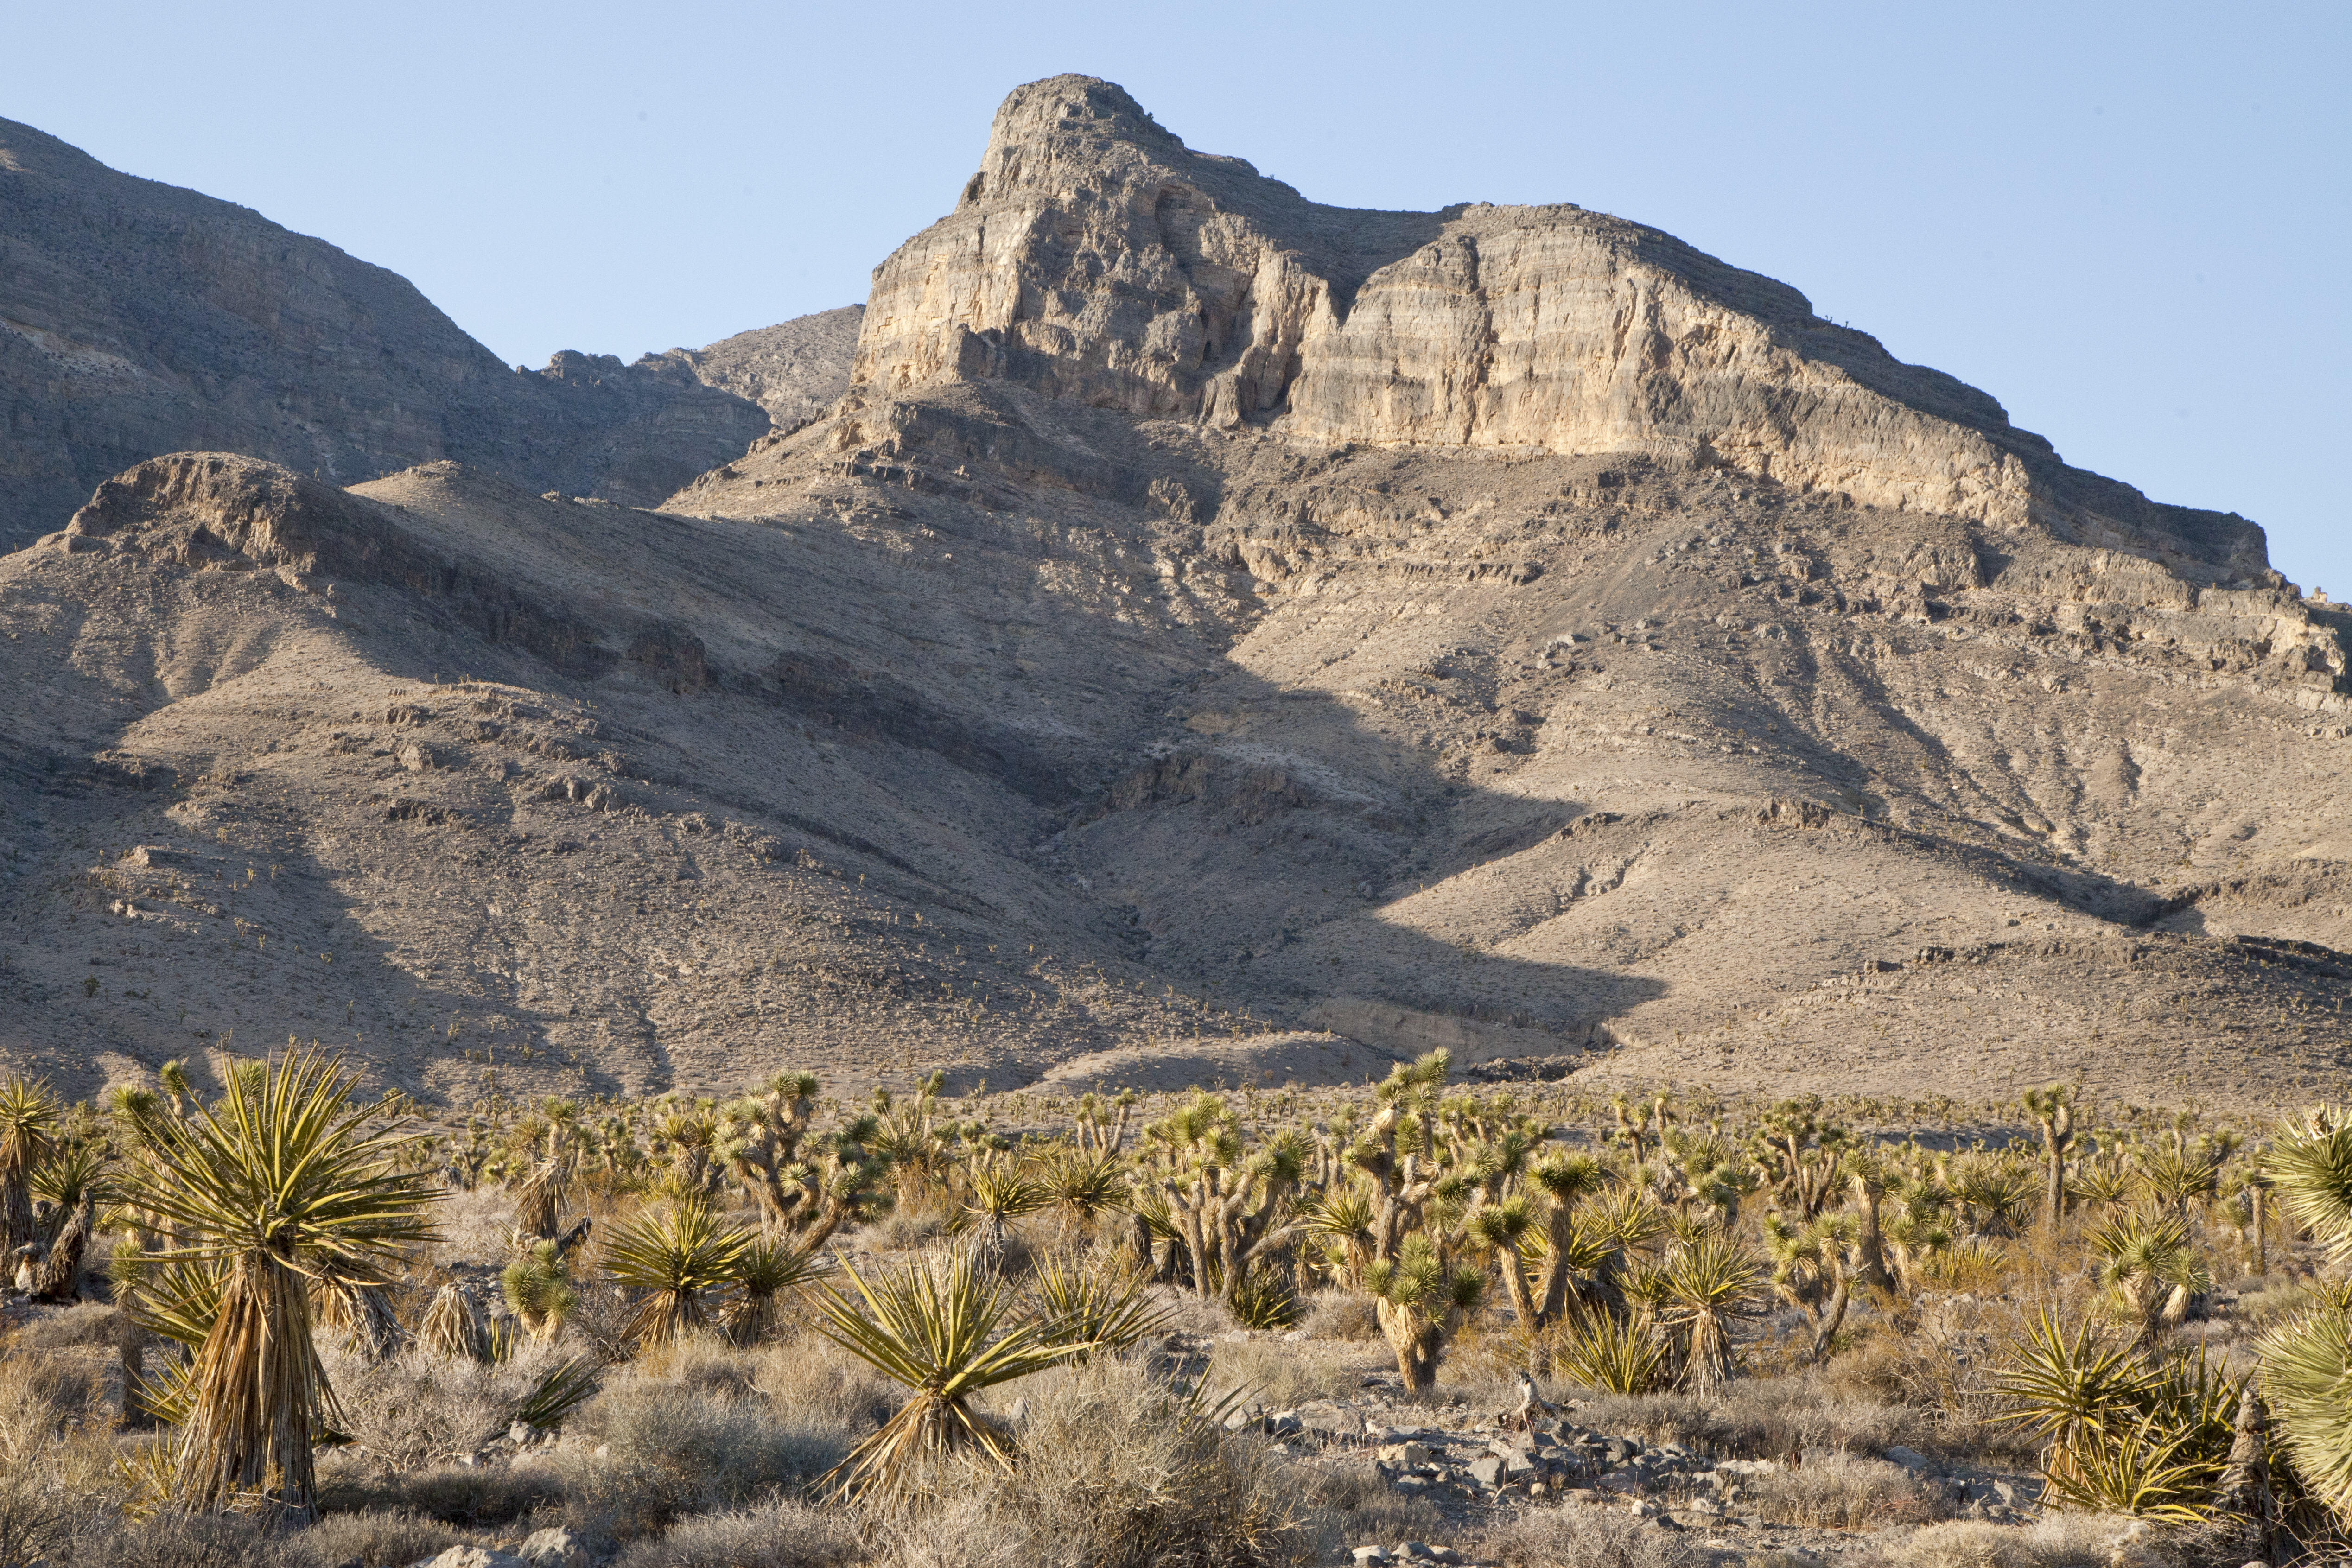 Desert landscape; mountains in the distance and yucca trees in the foreground